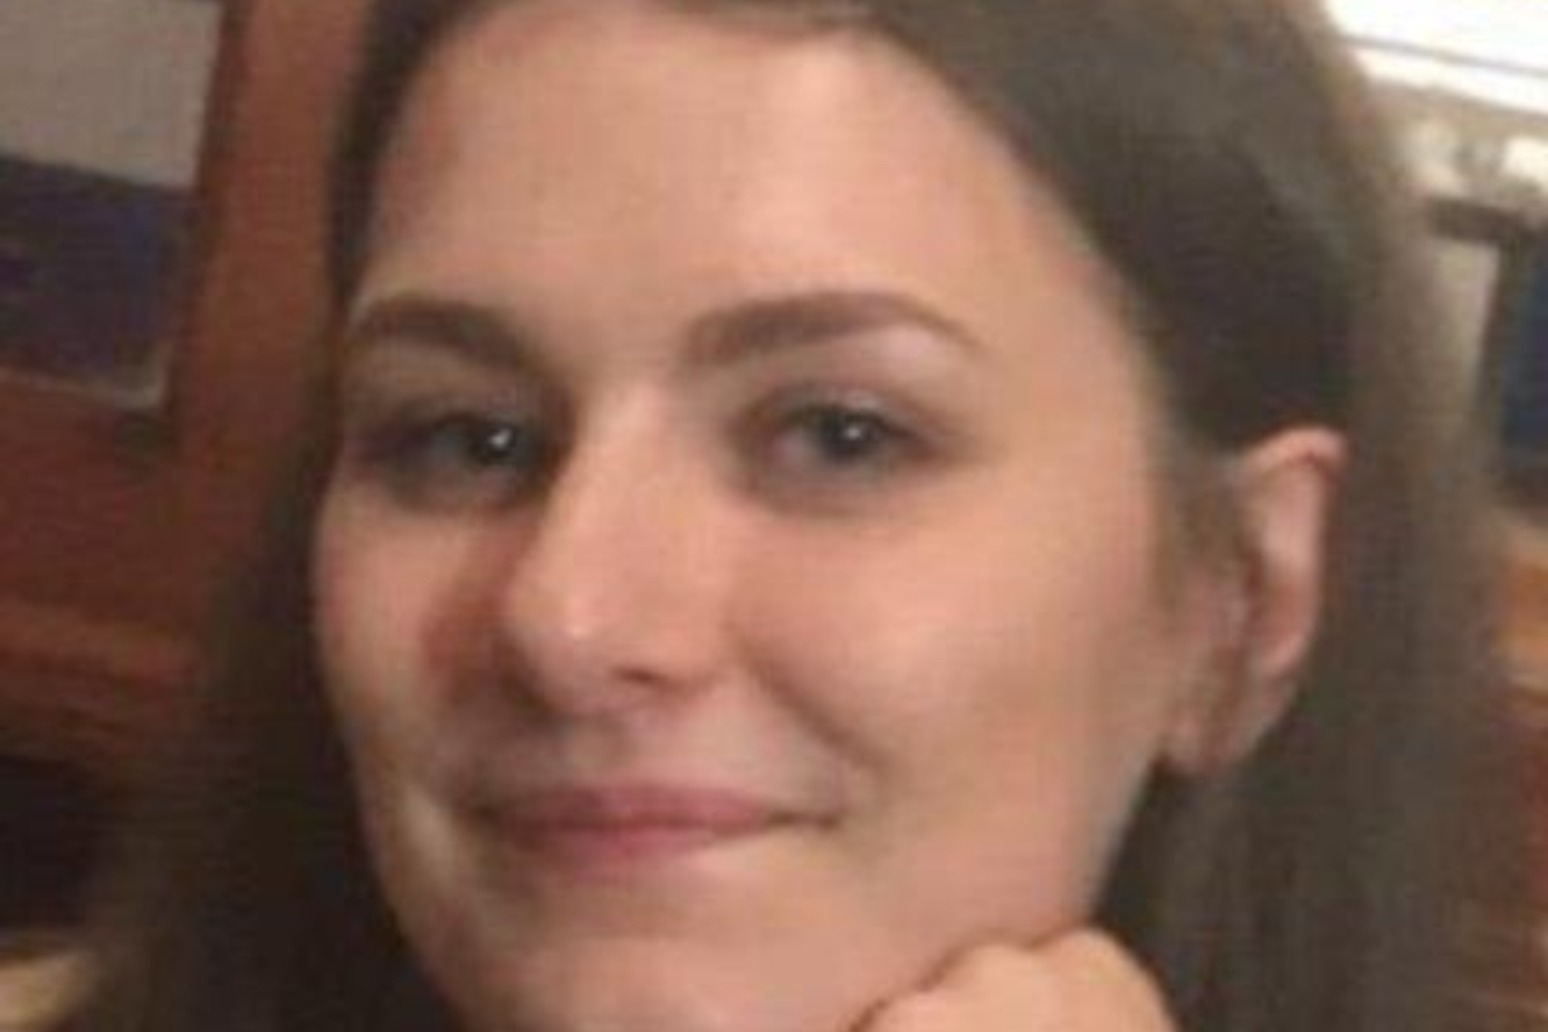 FUNERAL SERVICE FOR STUDENT LIBBY SQUIRE TO TAKE PLACE 